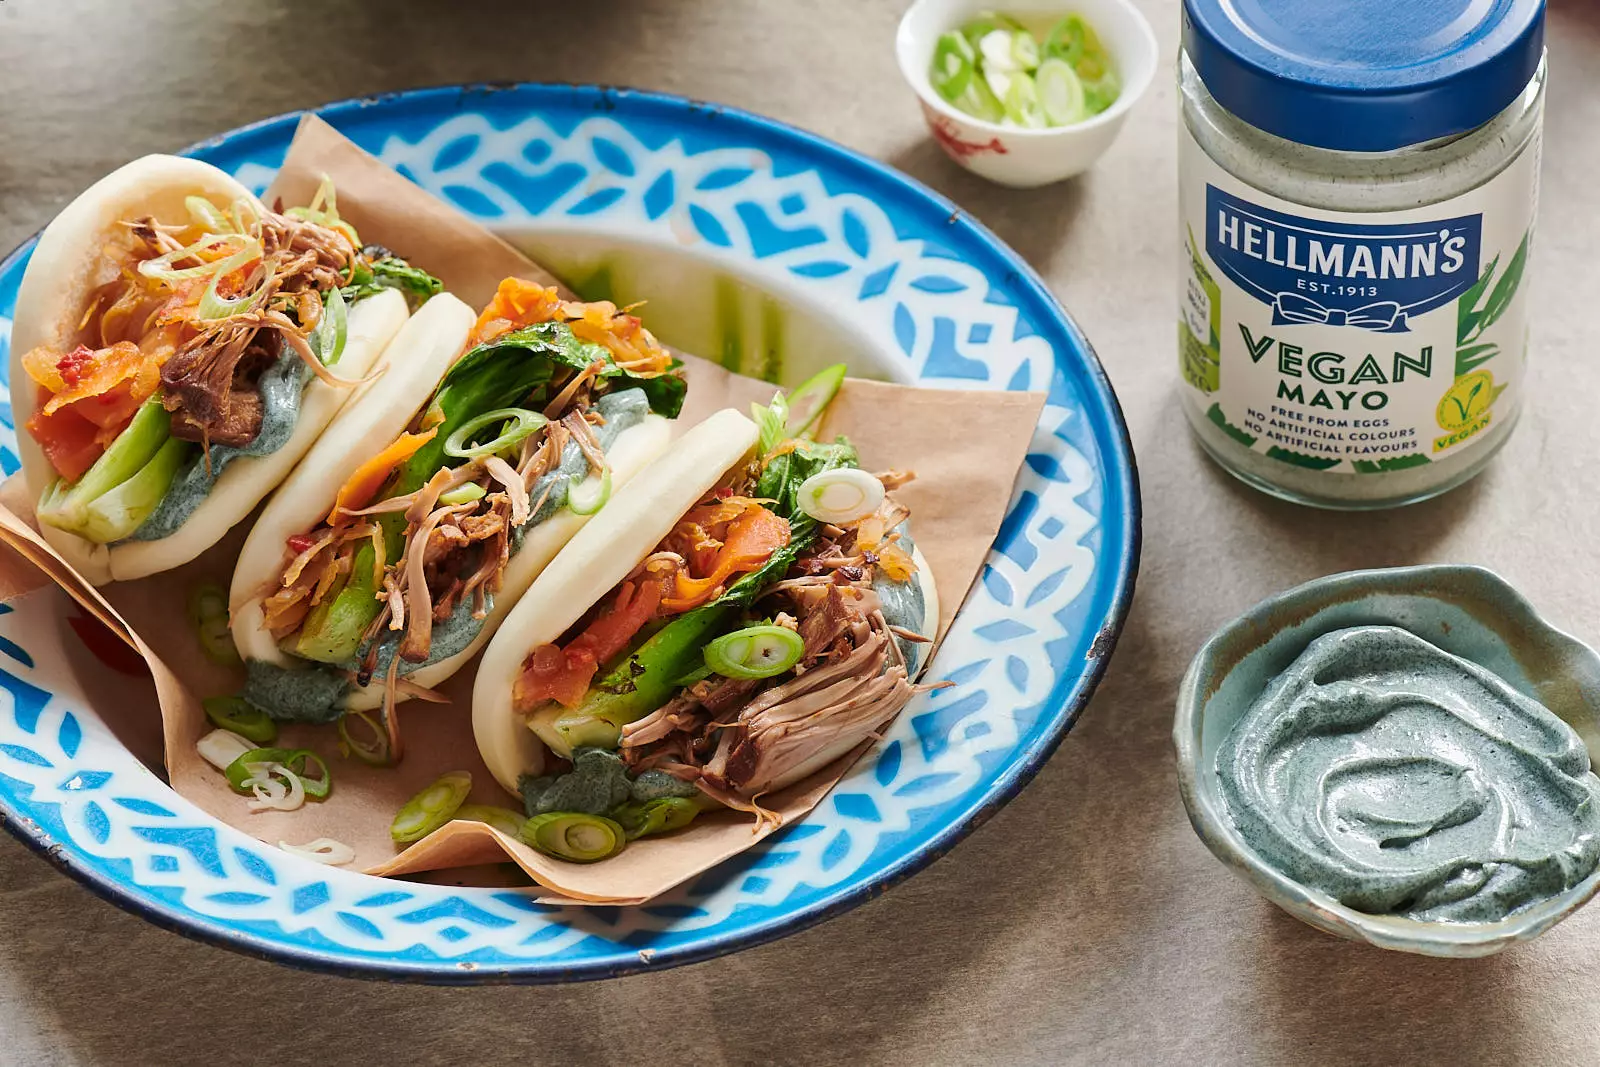 Hellmann's will be continue its Veganuary celebrations with The Hellmann's Vegan Rain-Bao Truck, serving colourful bao buns (